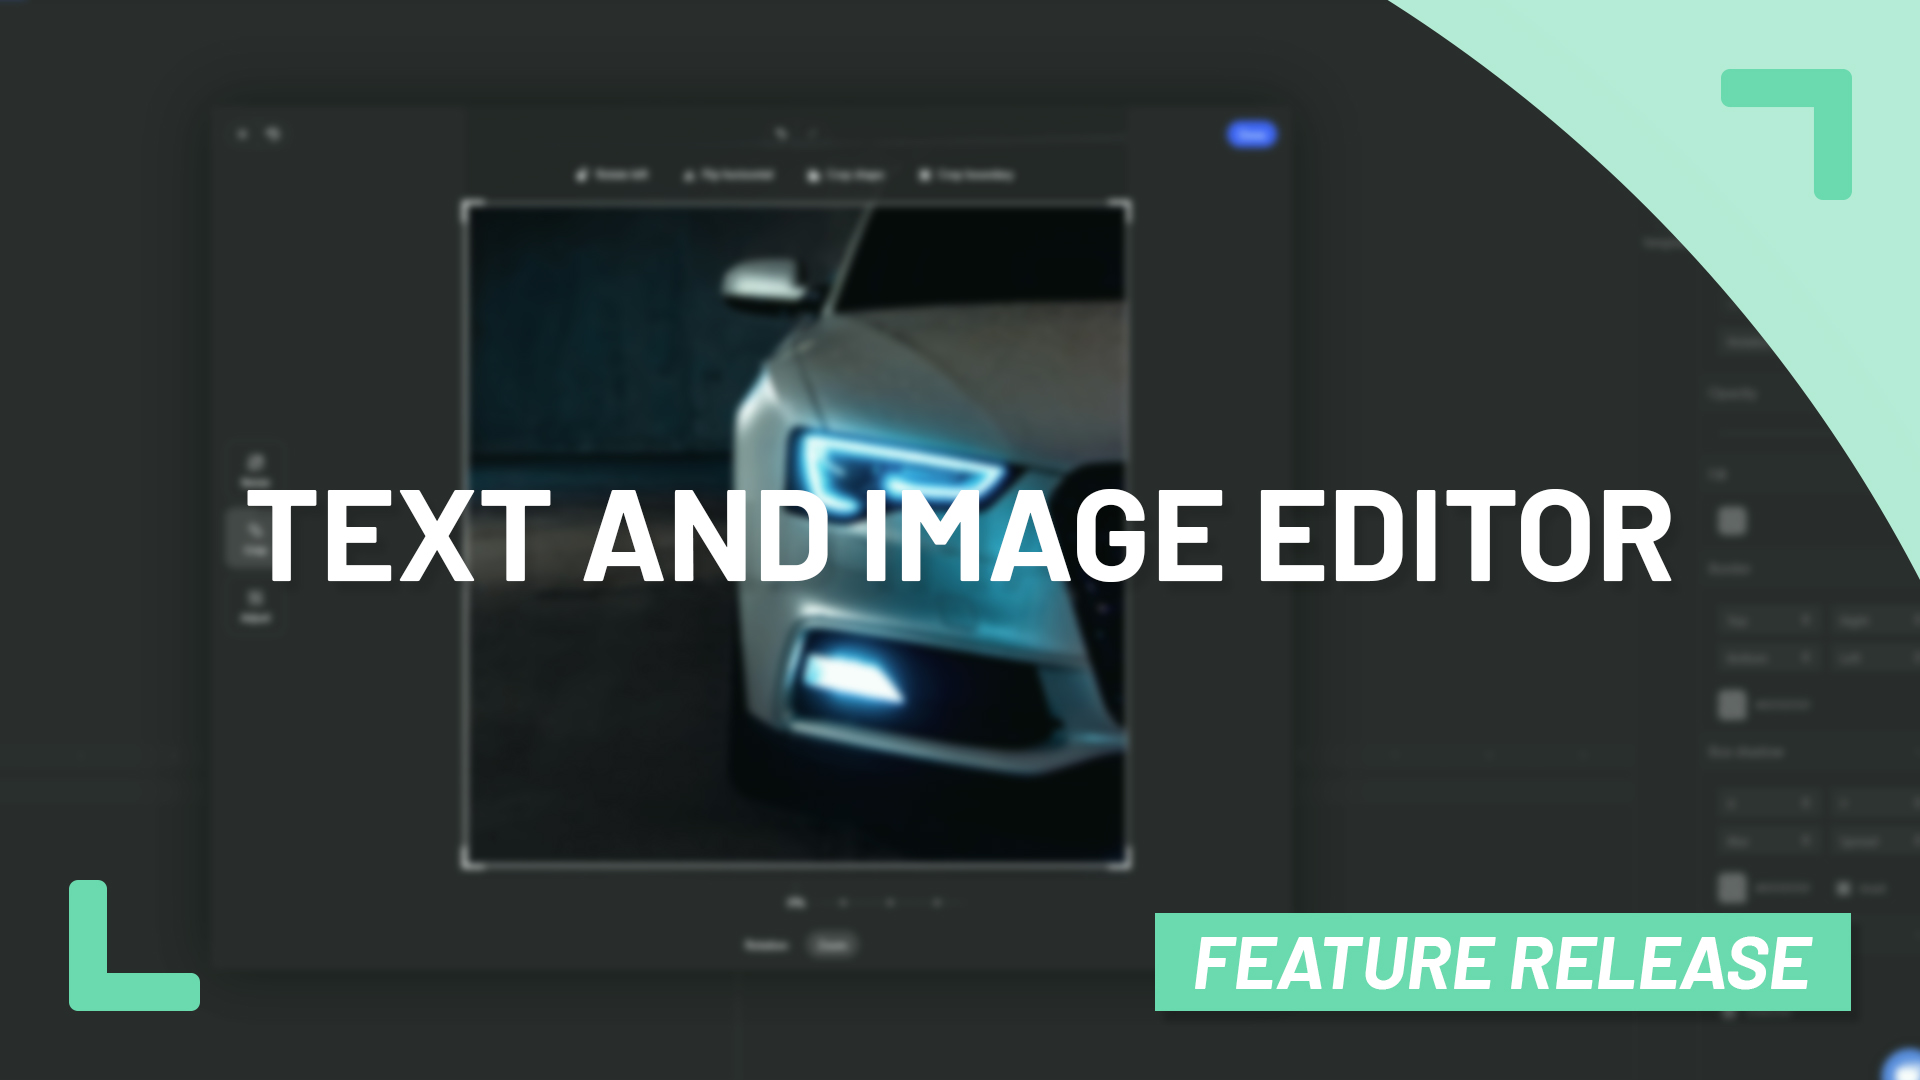 Feature Release: Enhanced Creative Freedom With Image & Text Editor